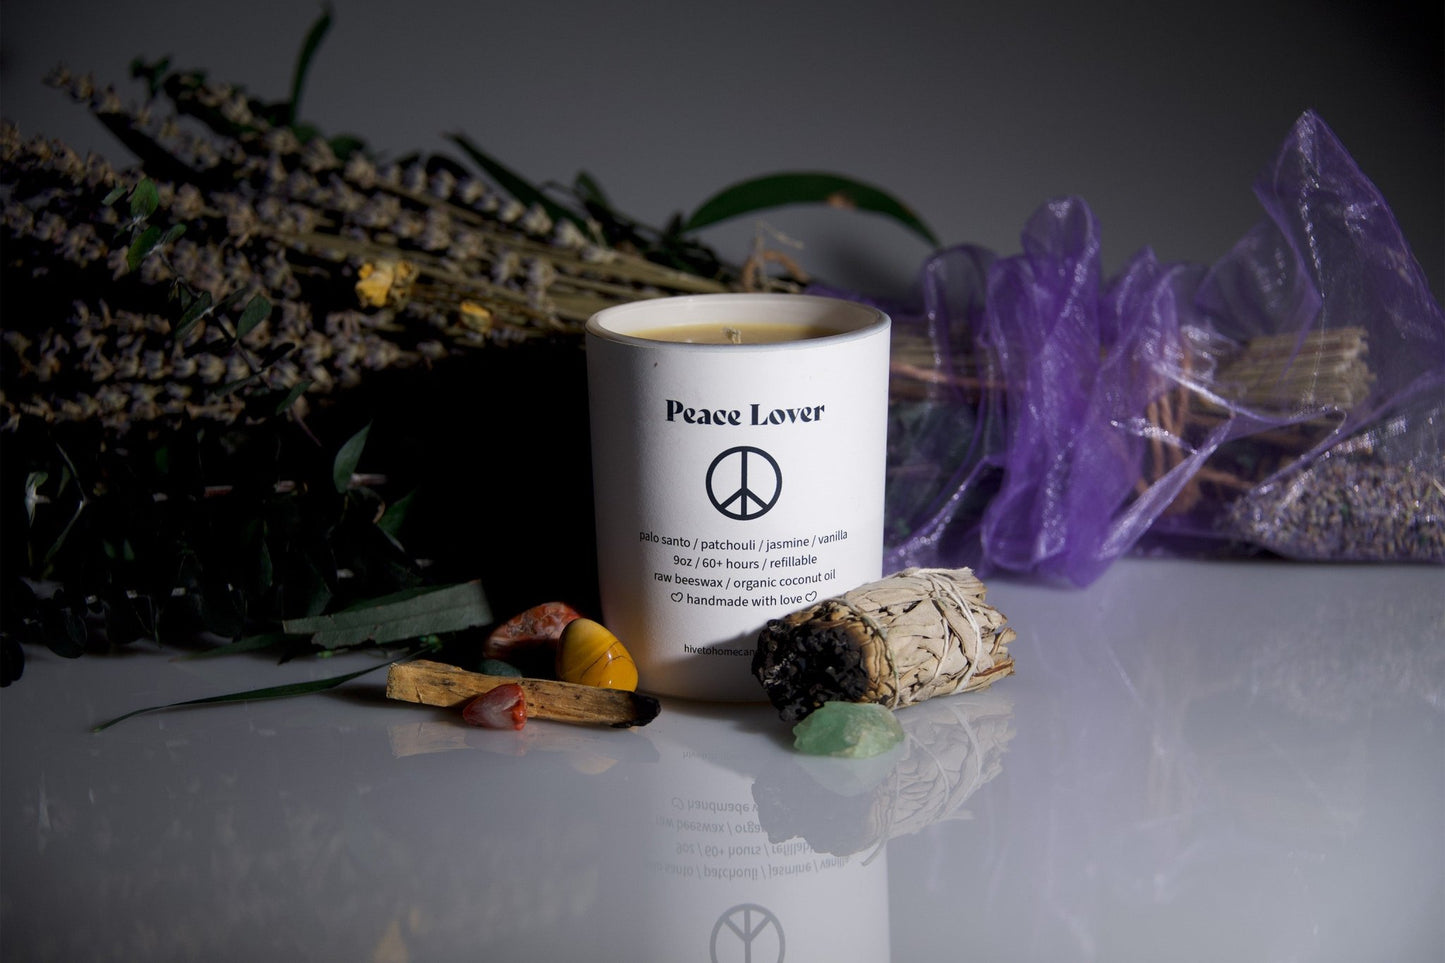 Hive To Home Candle Co's Peace lover candle, palo santo & patchouli scented candle